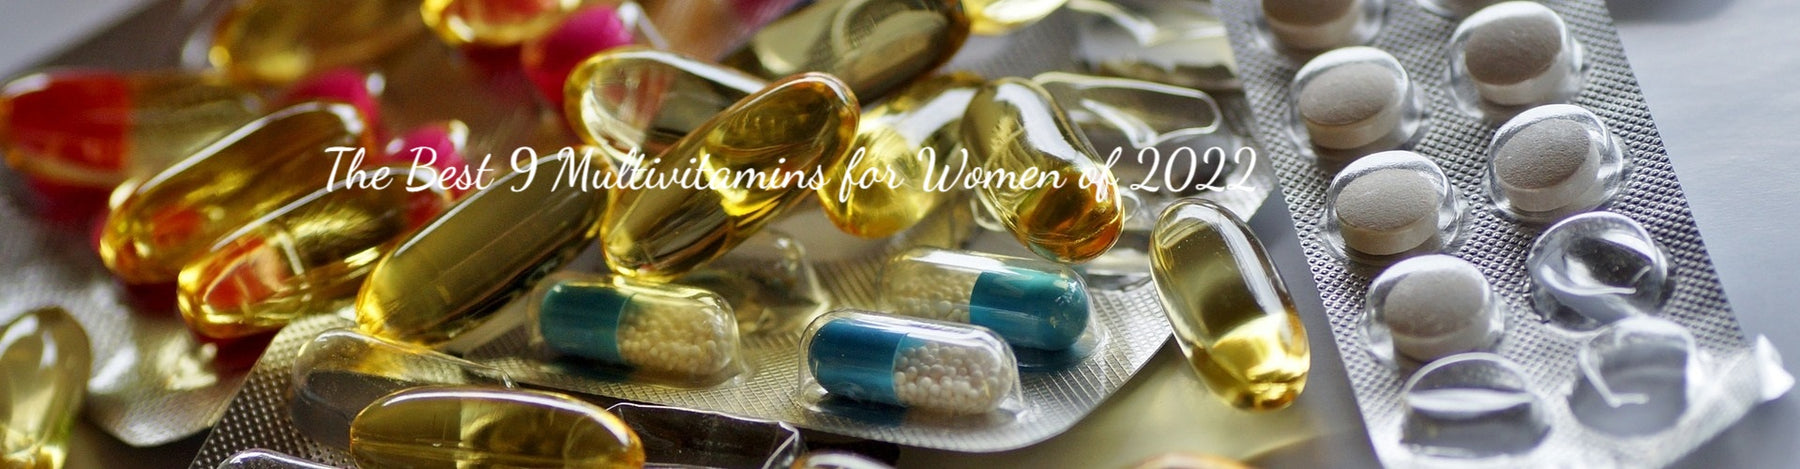 The Best 9 Multivitamins for Women of 2022